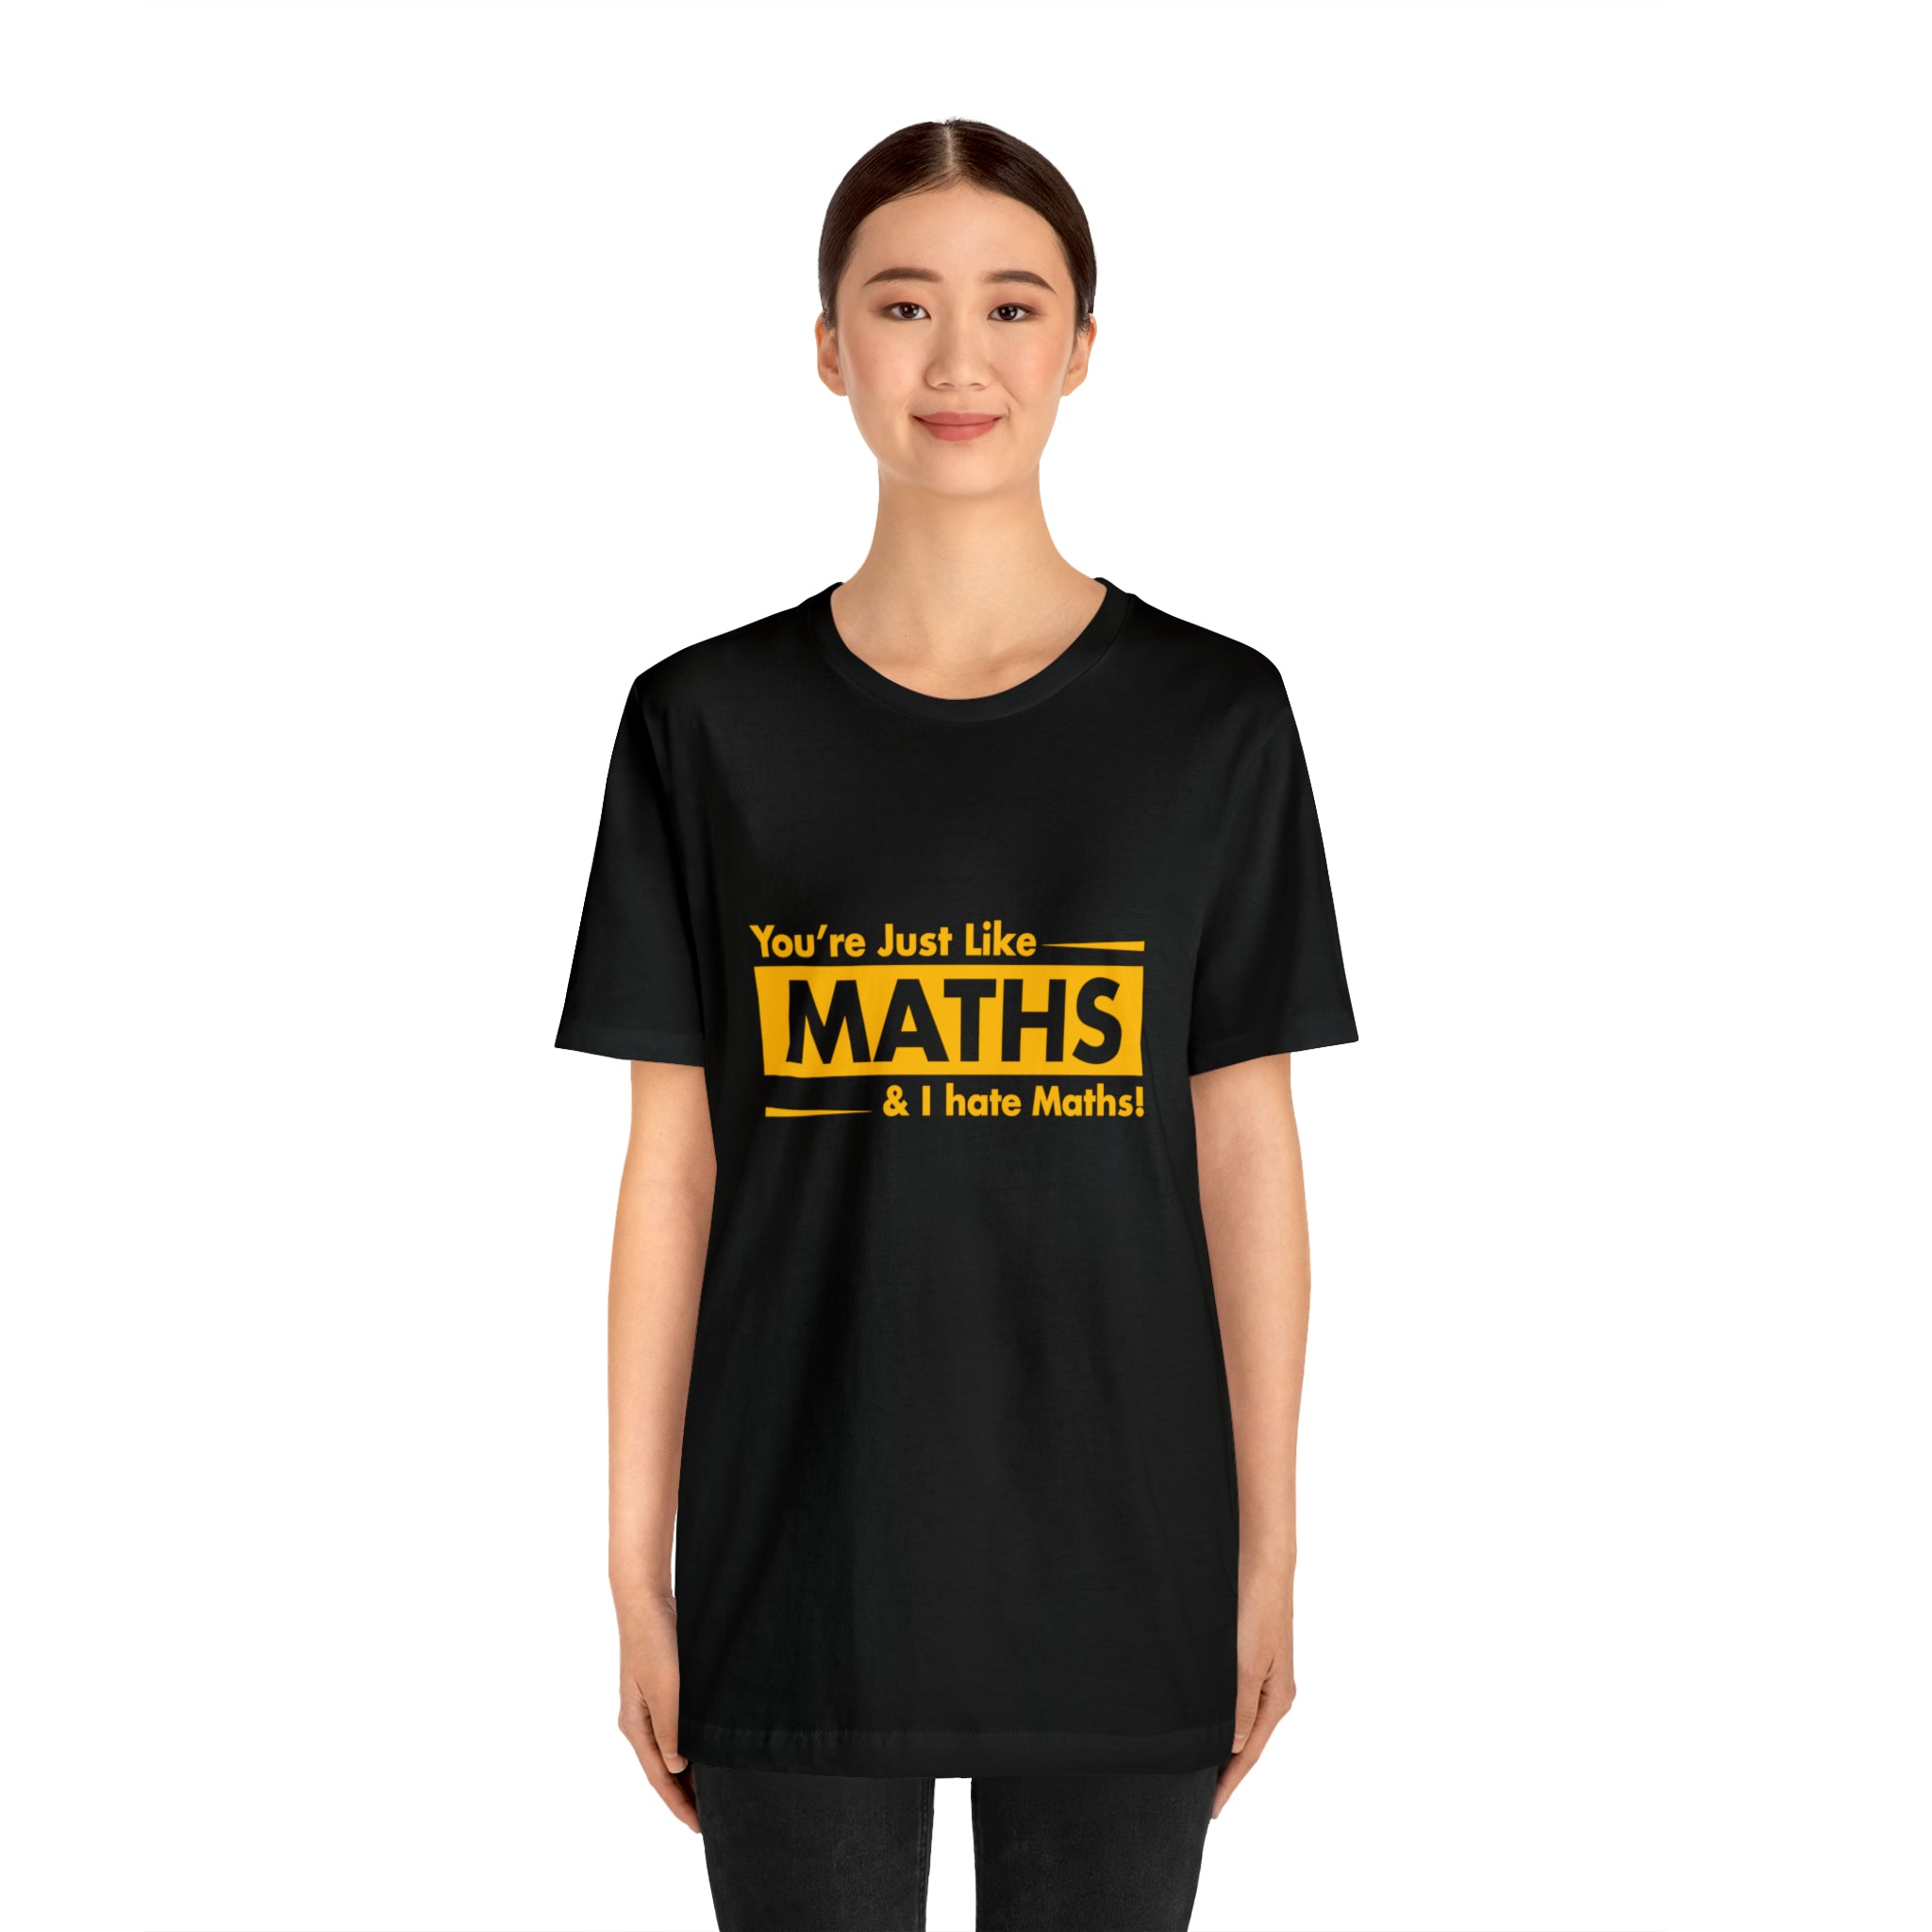 You're not like You are just like maths and I hate maths T-Shirt - unisex fashion sense.